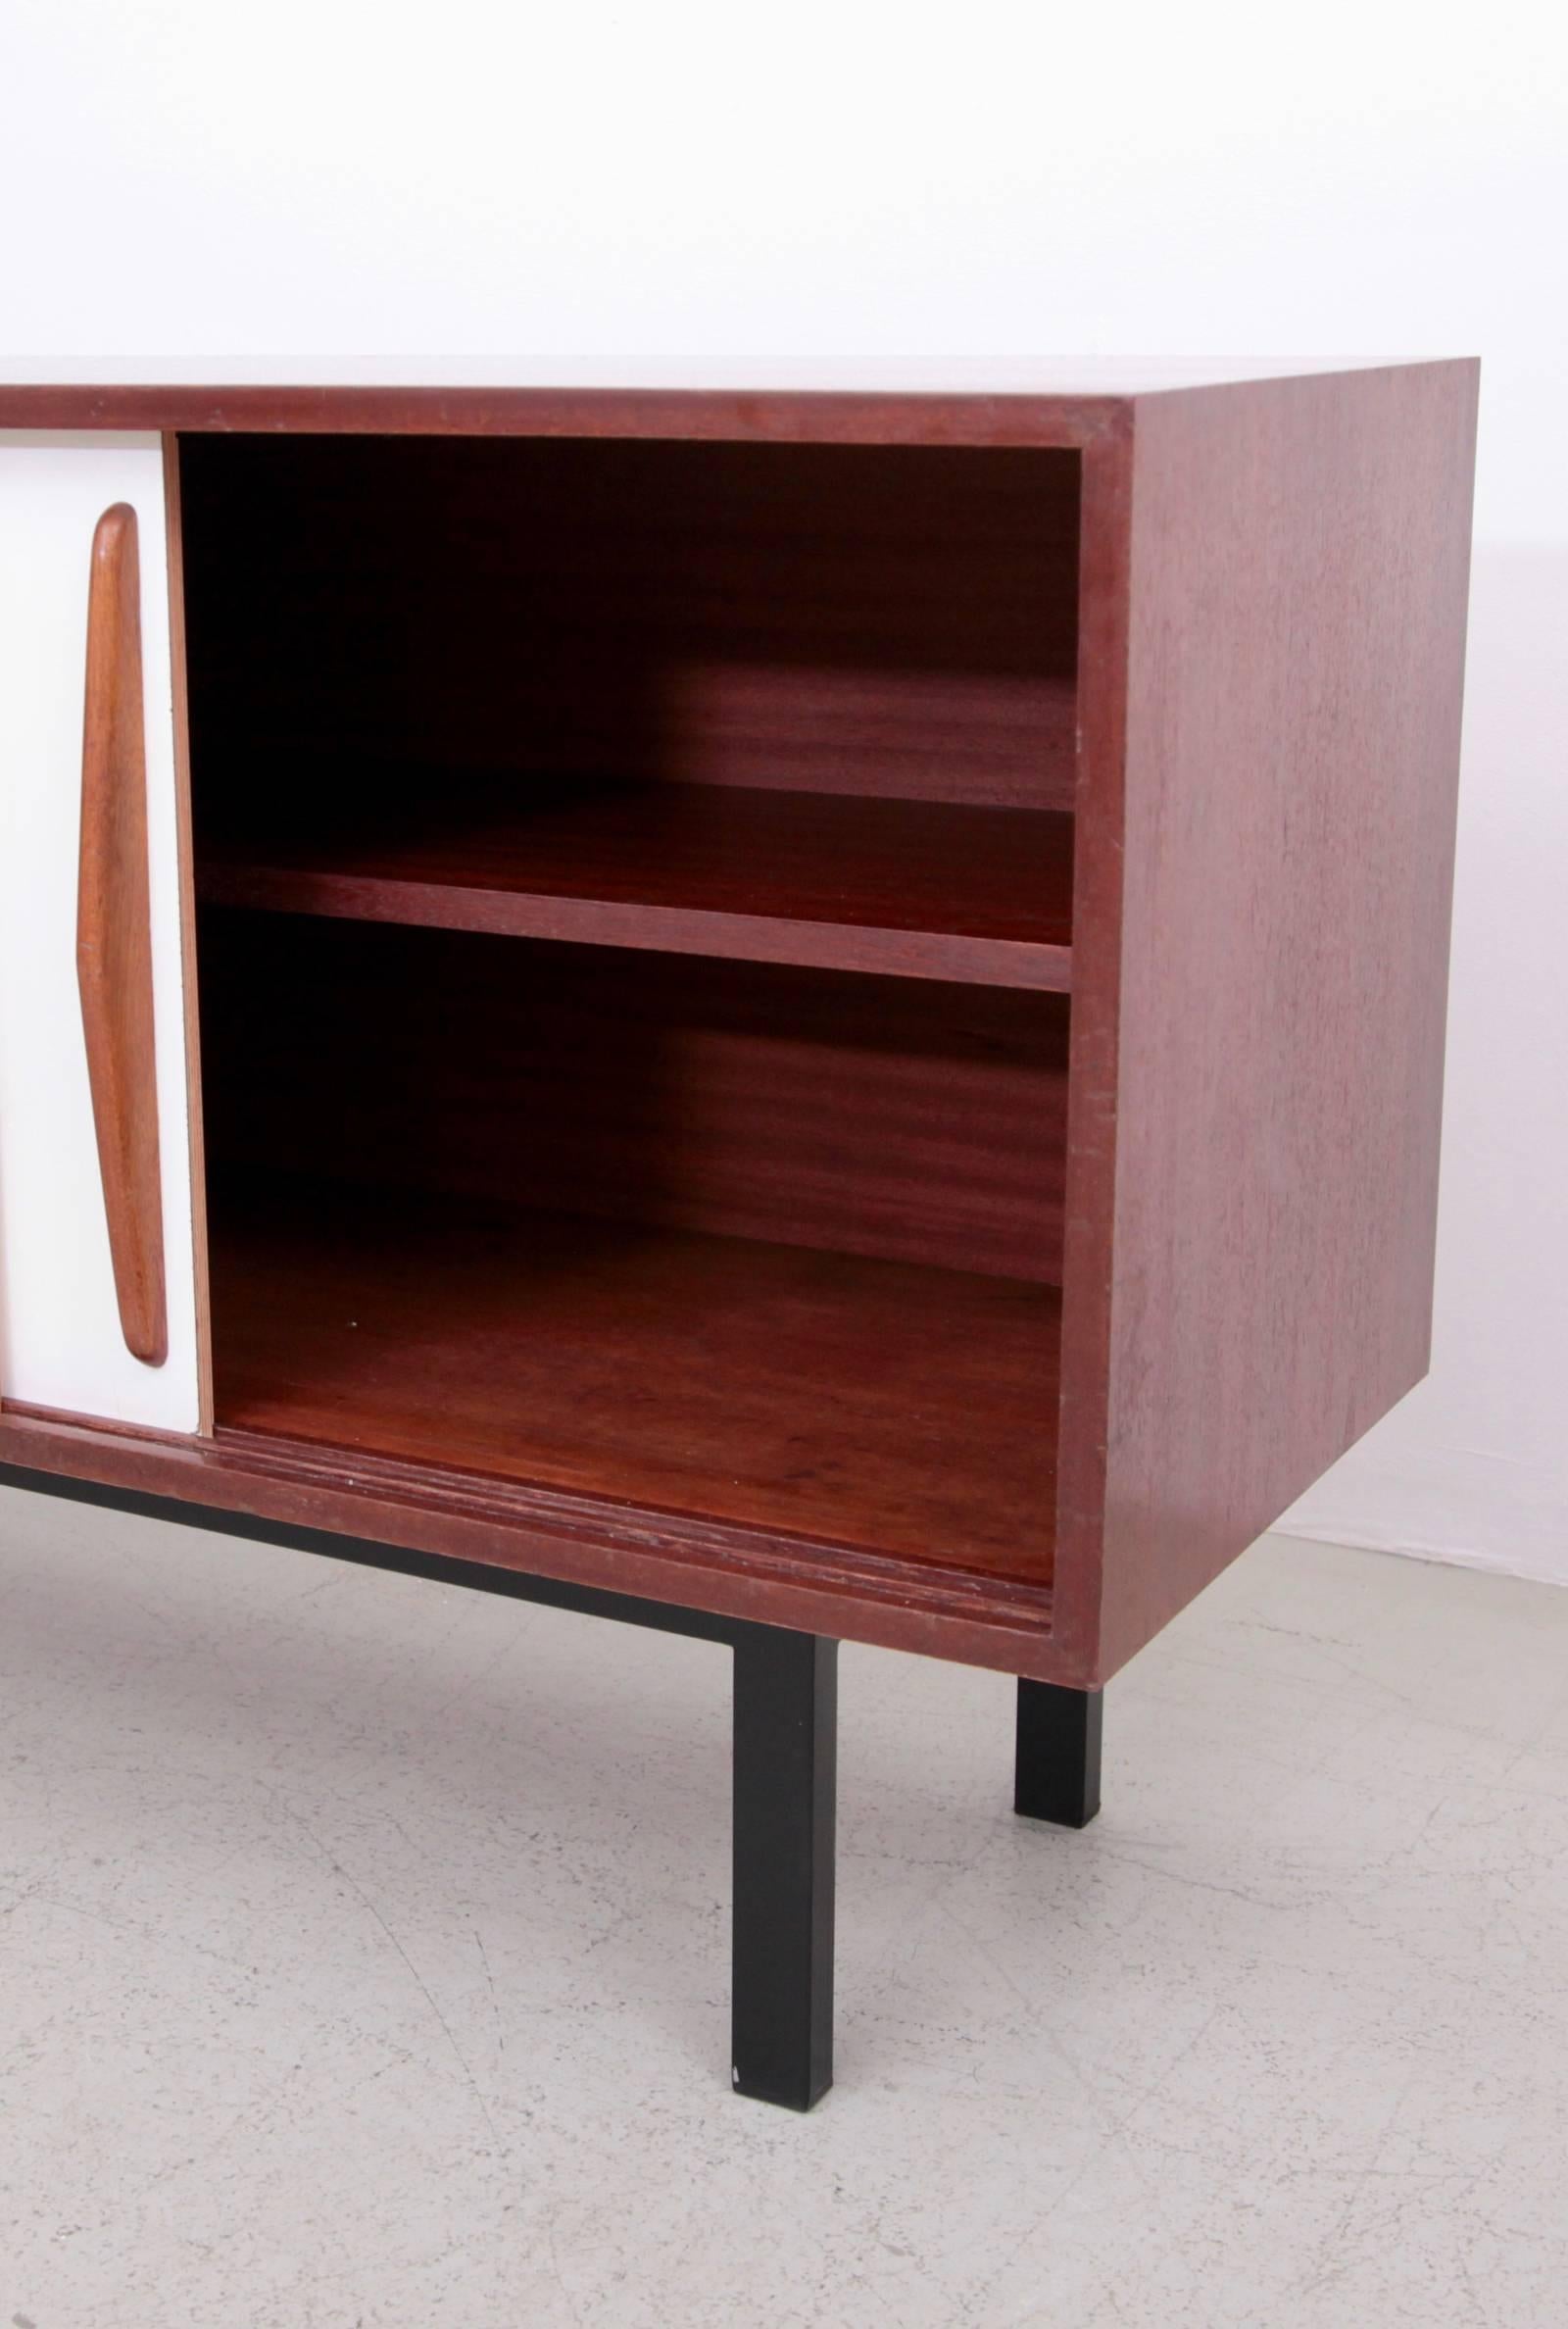 Charlotte Perriand Cansado Sideboard by Steph Simon in Mahogany 1